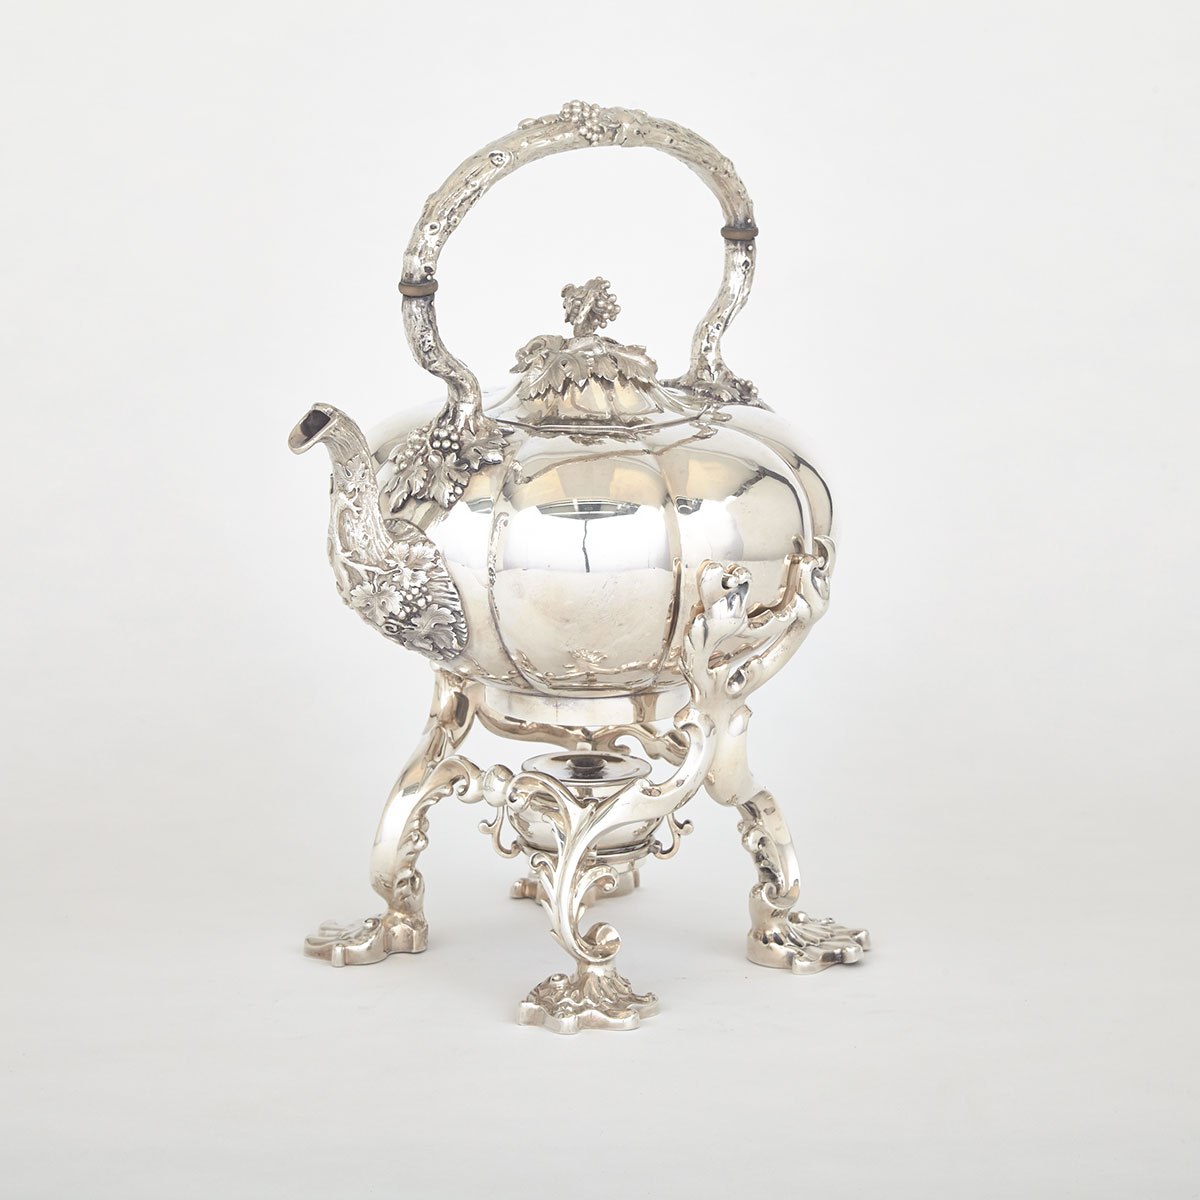 William IV Silver Kettle on Lampstand, Paul Storr, London, 1835